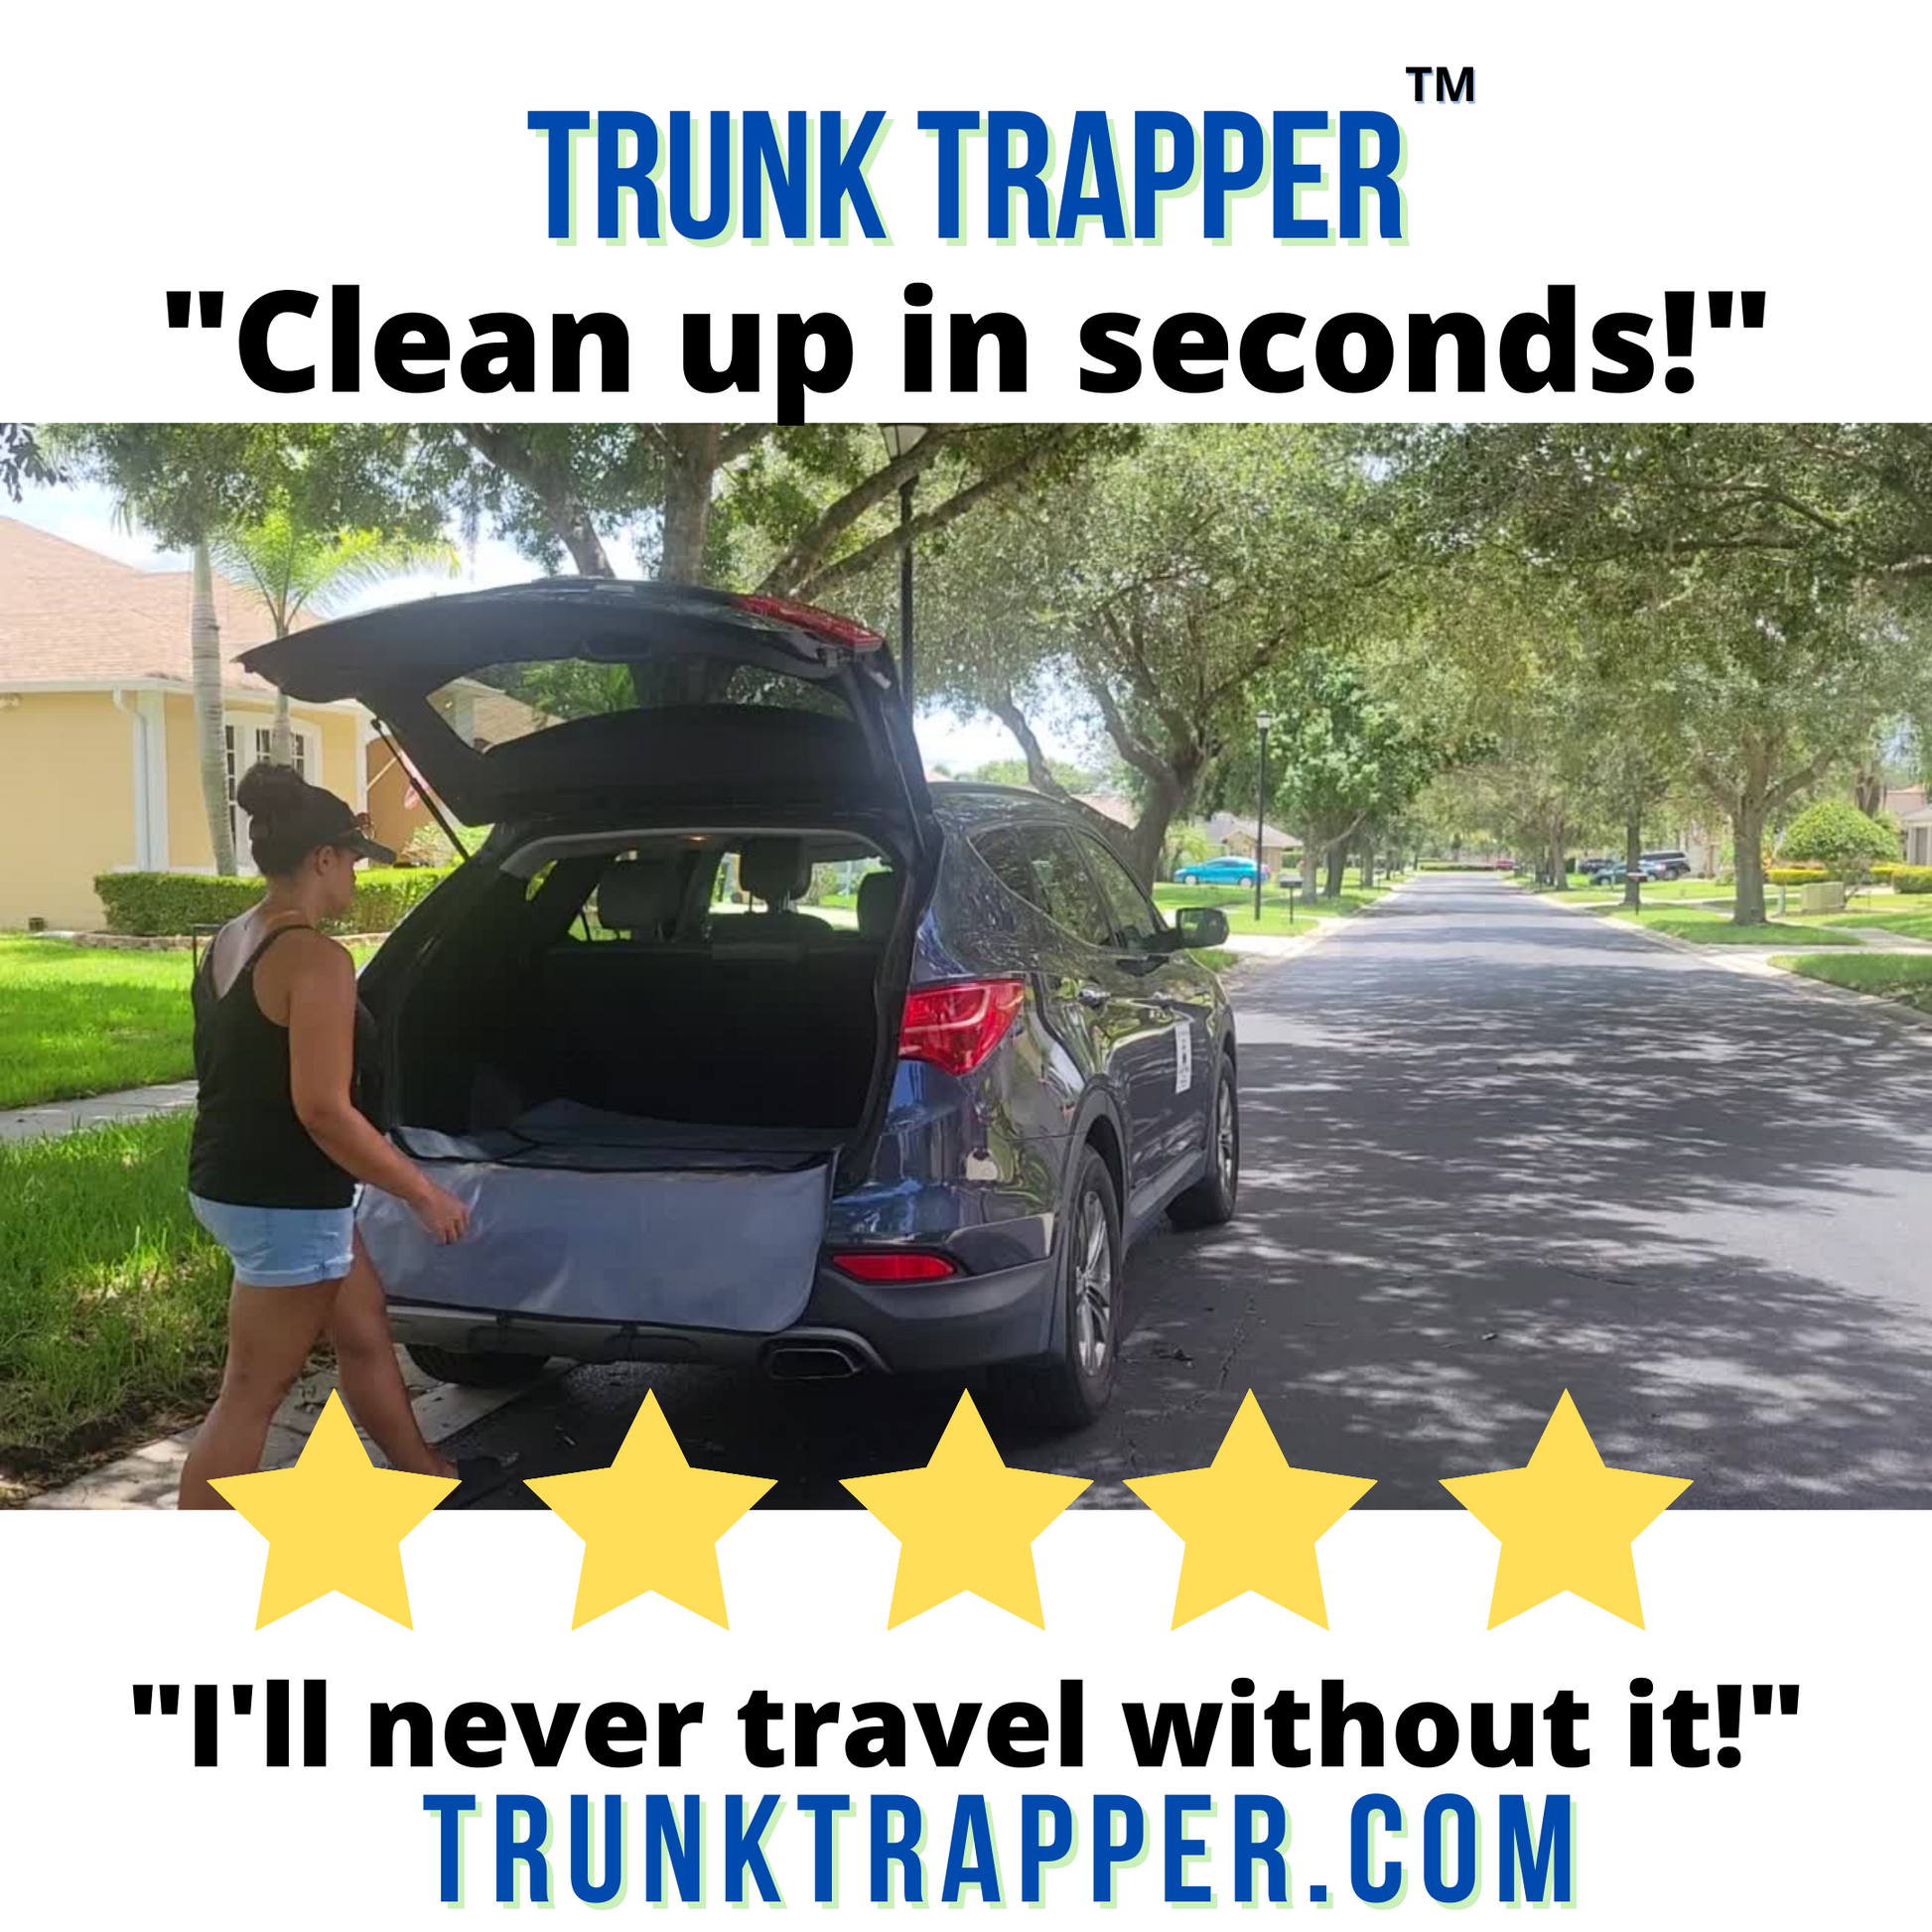 A trunk trapper with stars, making clean up quick and easy in just seconds.